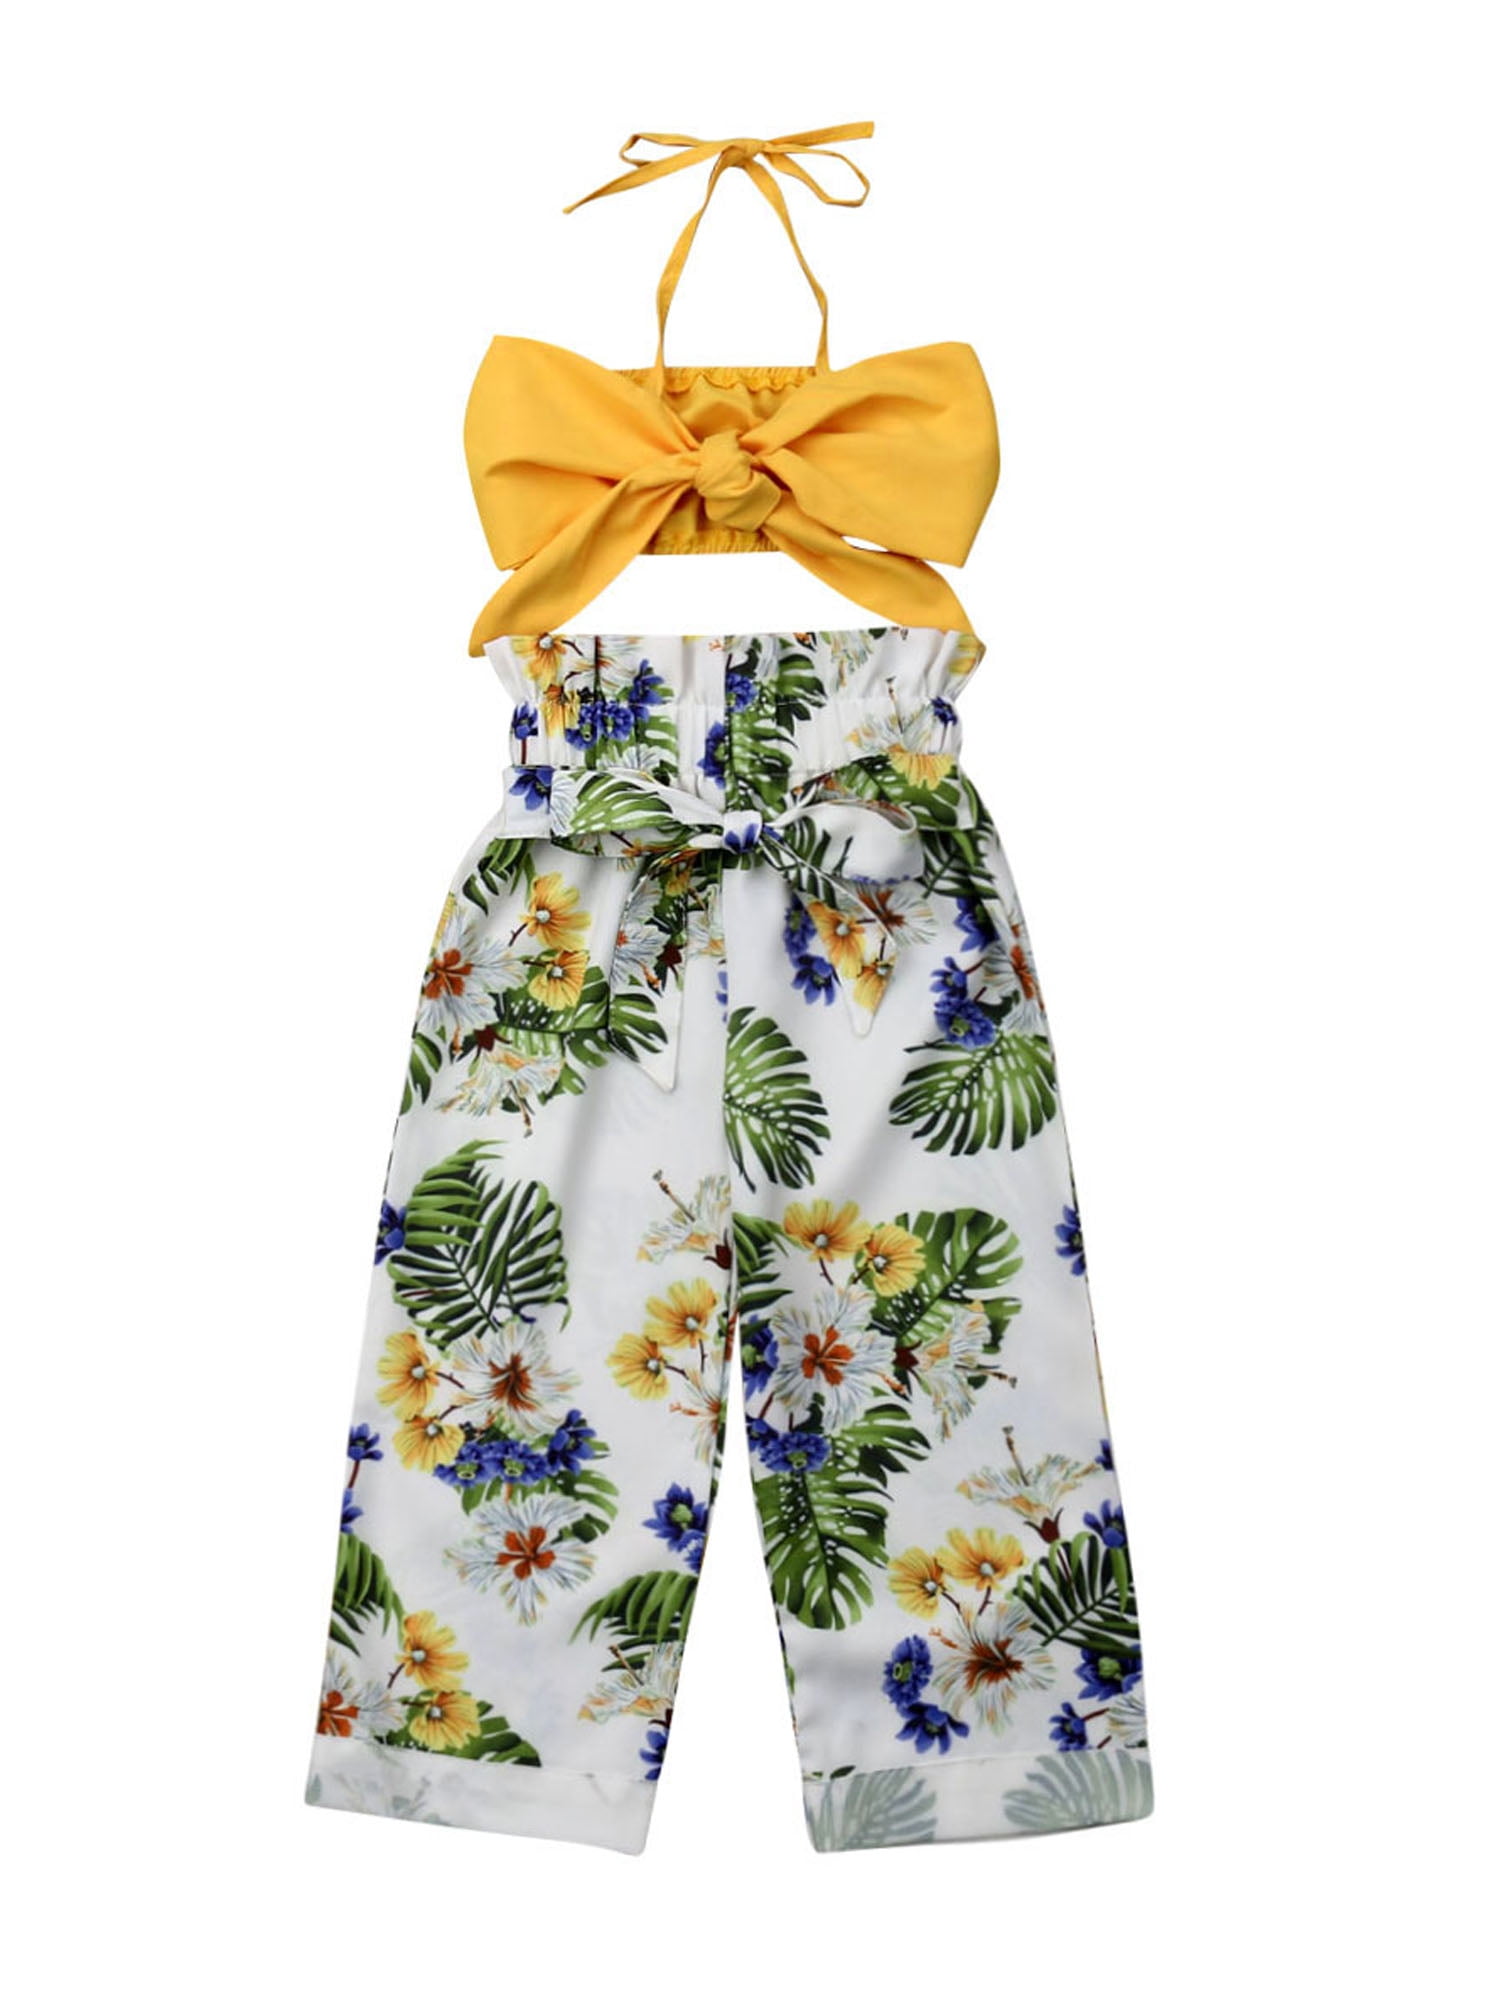 US Toddler Baby Girls Summer Clothes Vest Crop Tops Floral Long Pants Outfit Set 